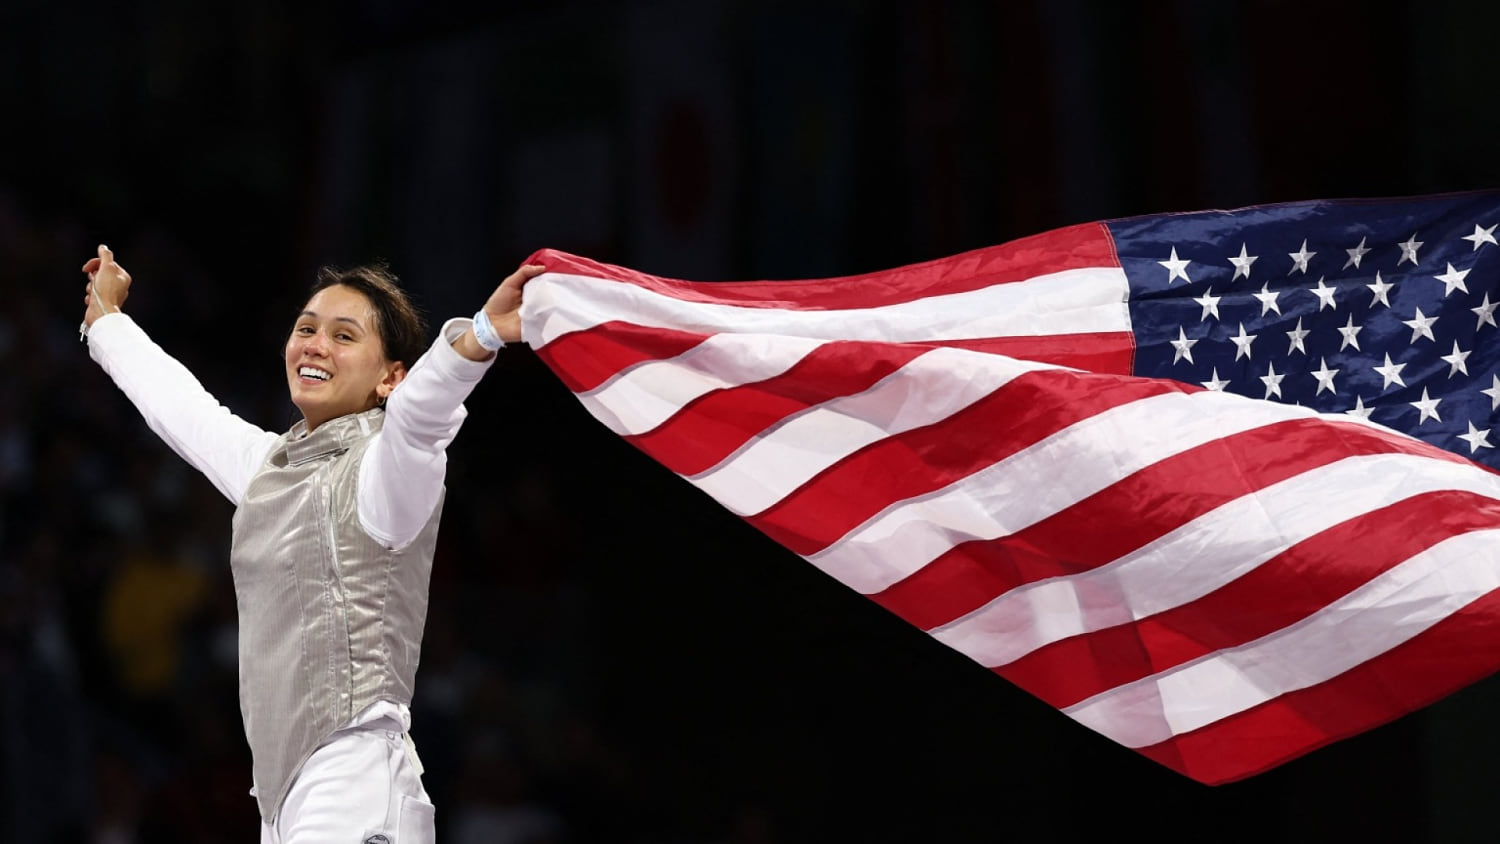 Olympic fencer Lee Kiefer 'couldn't ask for anything more' after winning second gold medal